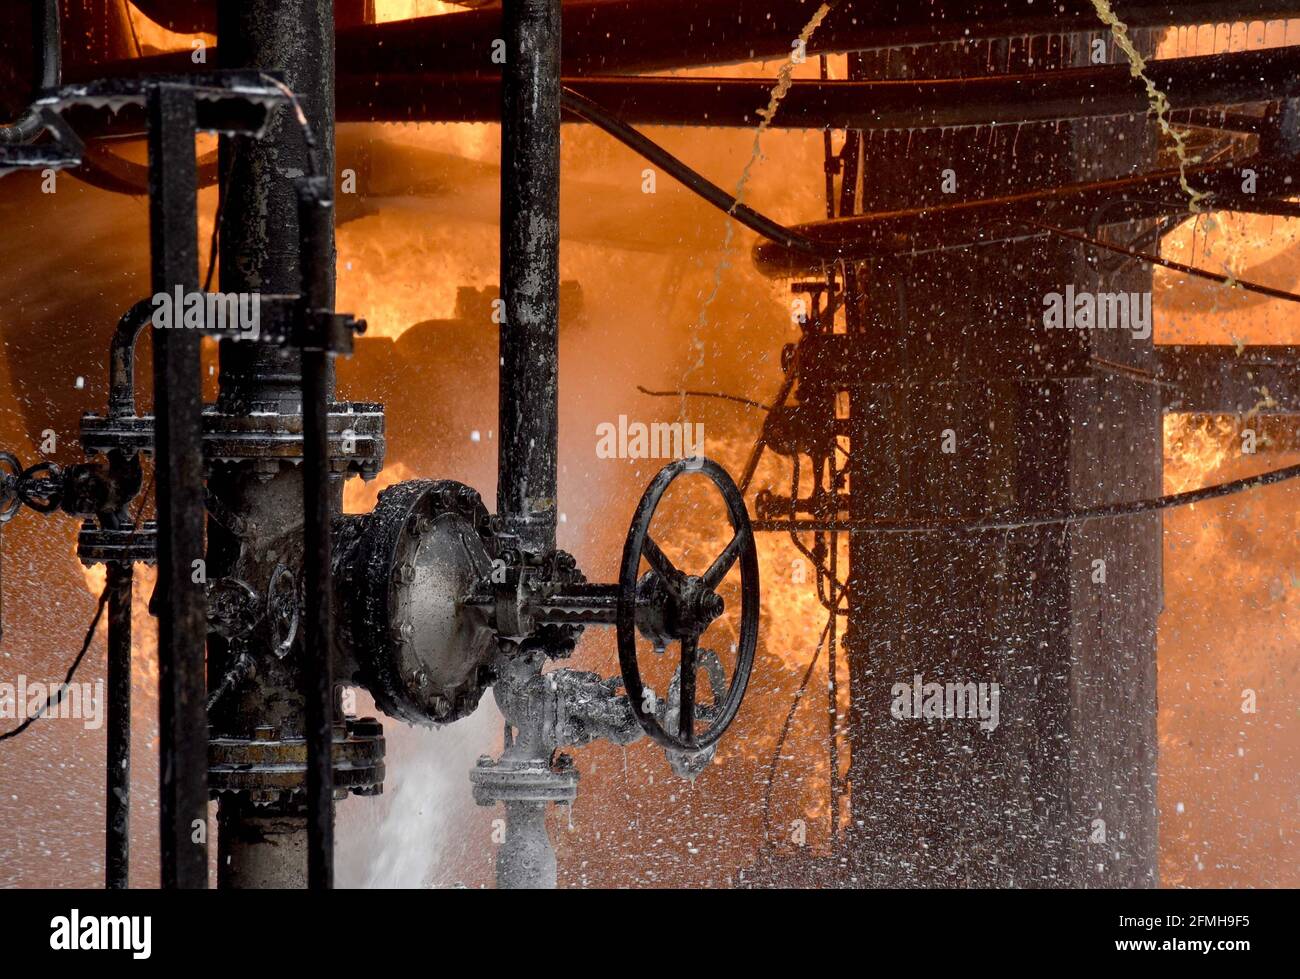 Homs, Syria. 9th May, 2021. Photo taken on May 9, 2021 shows a fire scene in an oil refinery in Syria's central province of Homs. Firefighters succeeded in putting out a fire that erupted in the oil refinery on Sunday morning, SANA news agency reported. Credit: Str/Xinhua/Alamy Live News Stock Photo